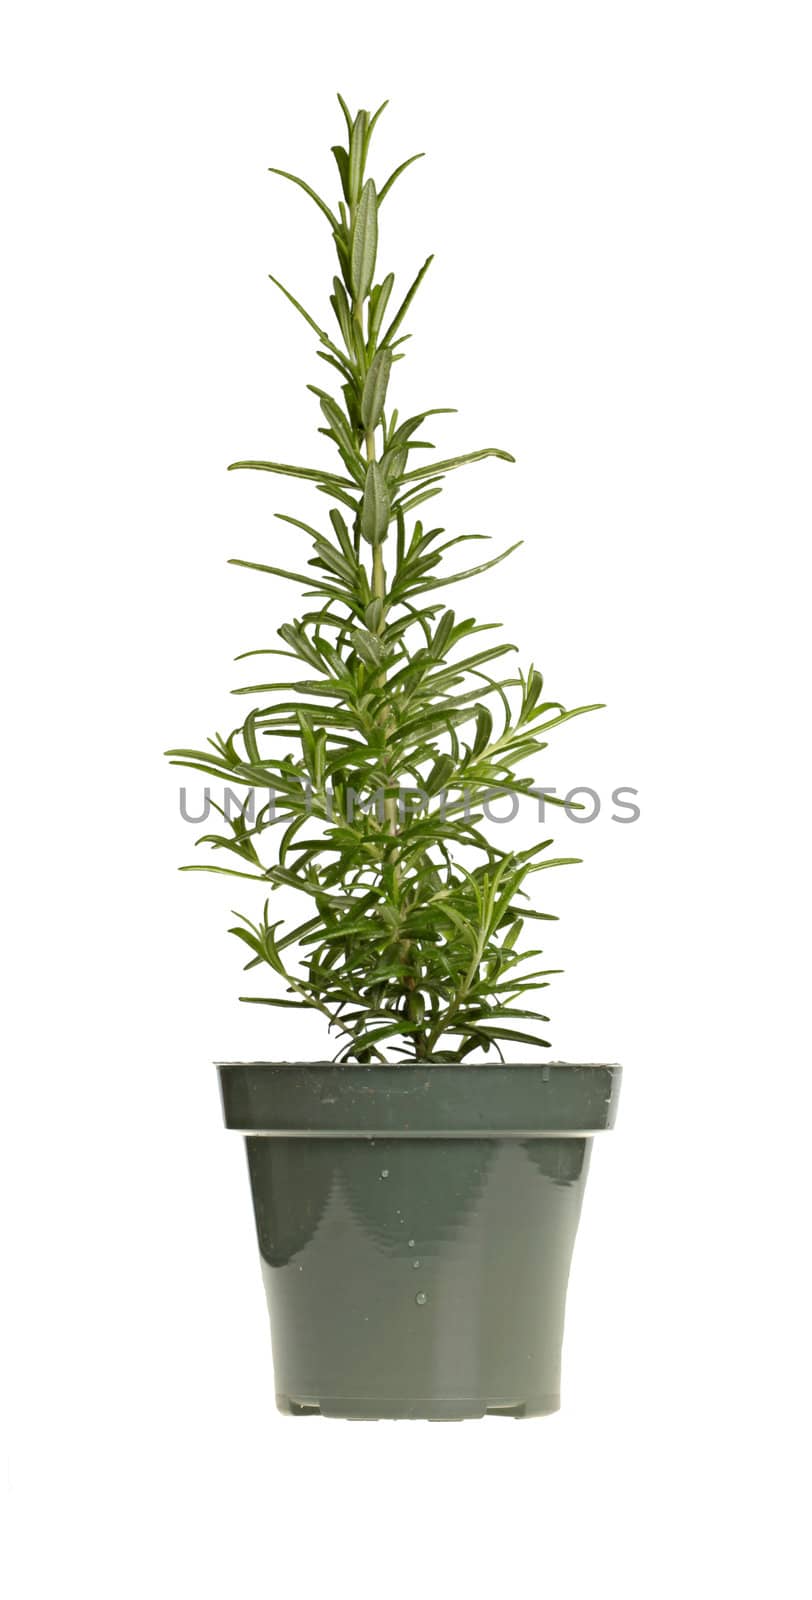 Plant of rosemary in a green plastic pot by sgoodwin4813